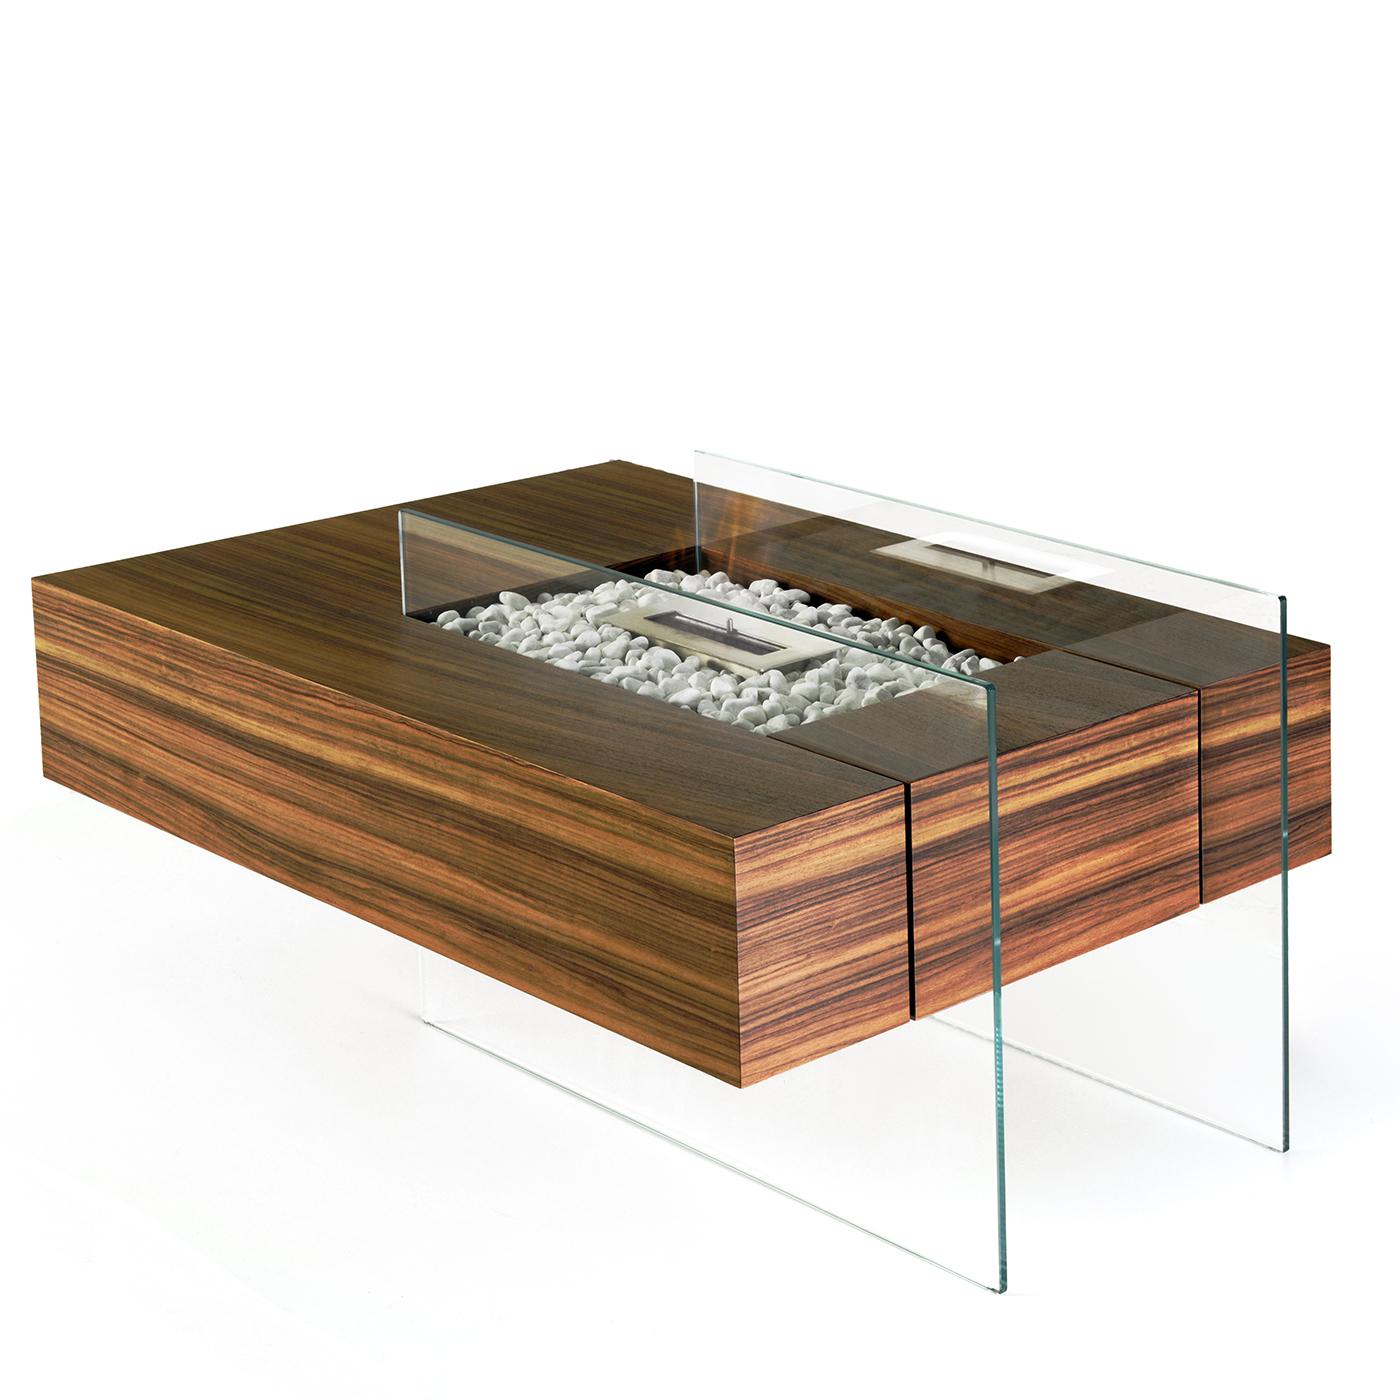 This extremely unique coffee table contains a bio-ethanol burner. Its design combines the essential elements of fire, stone, glass and Indian rosewood. The final result embodies the contrast between mass and lightness. The thick, solid top seems to